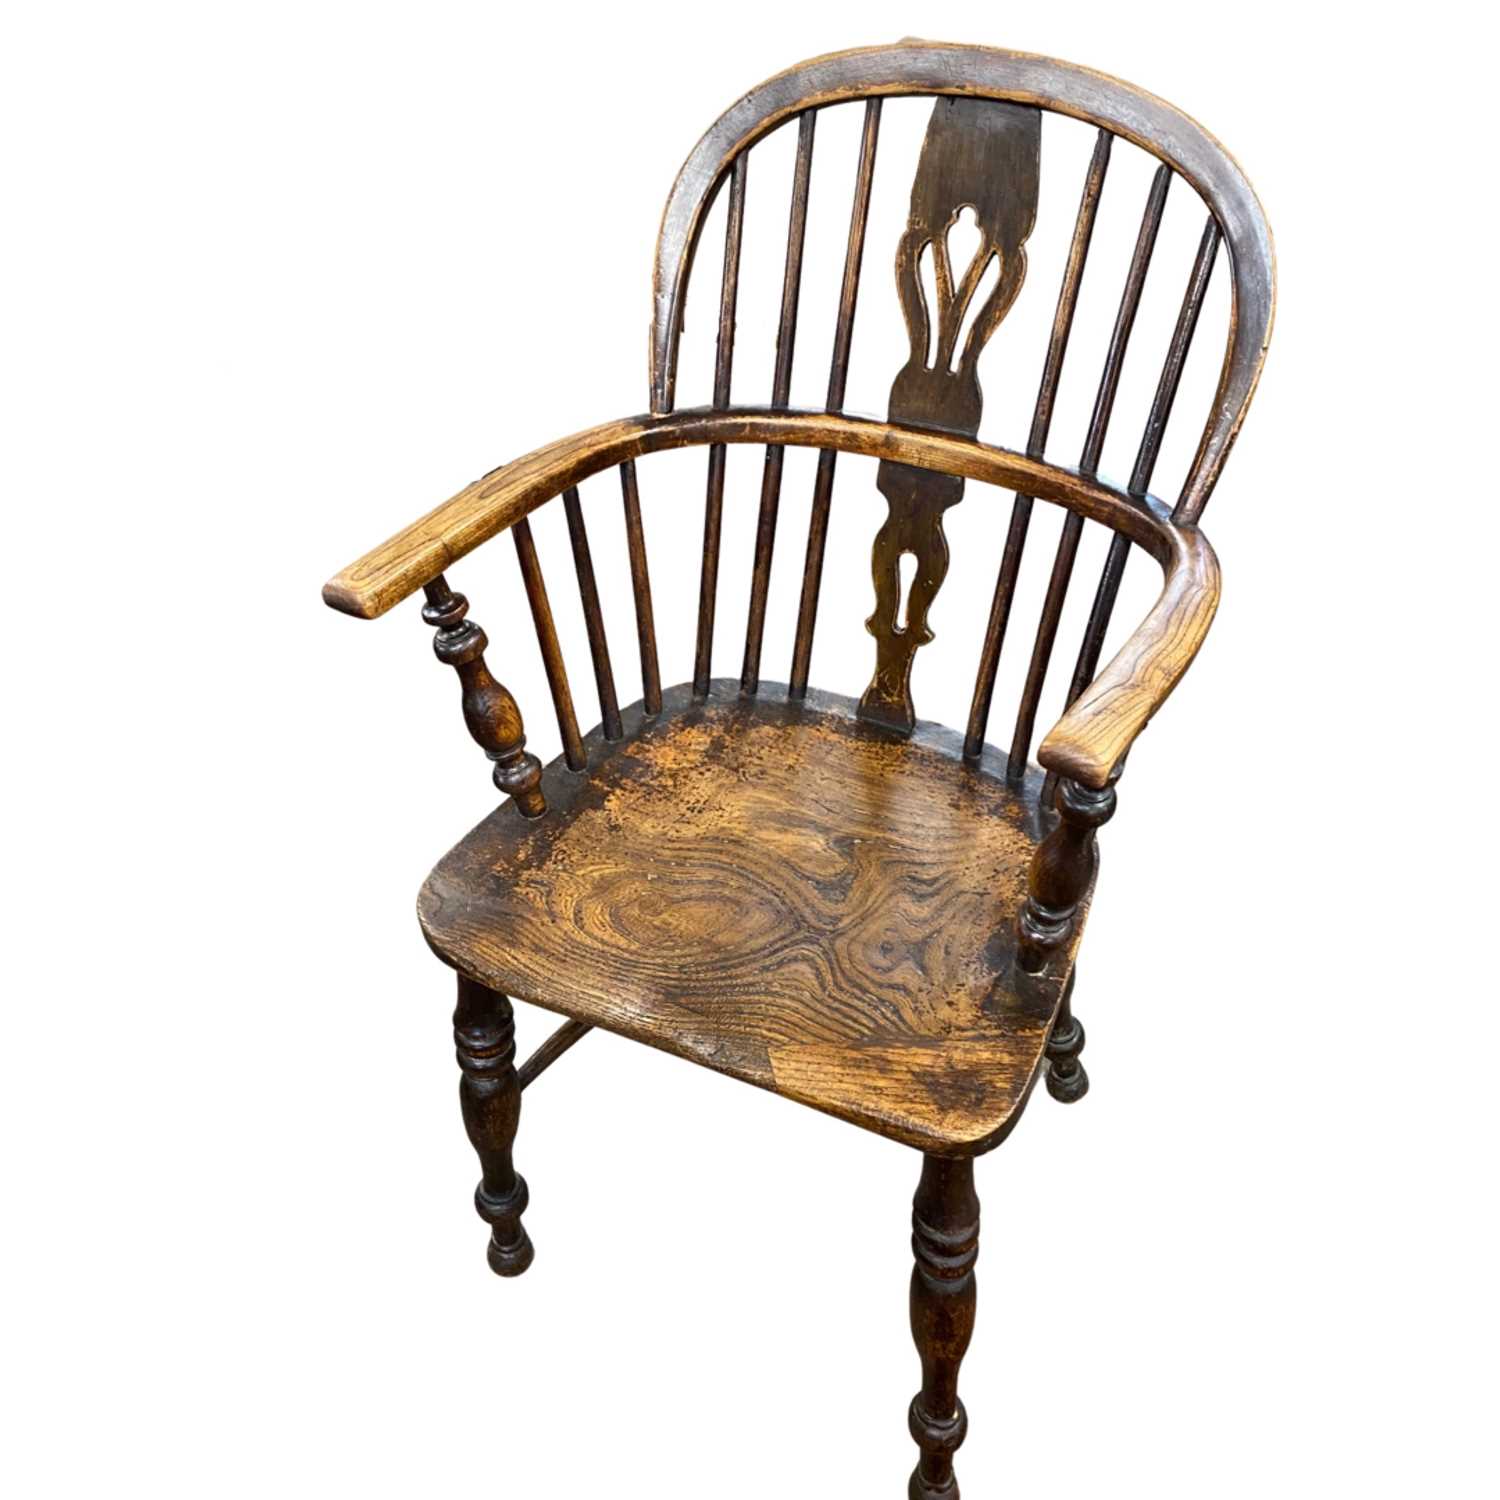 19th Century elm seated and stick back Windsor chair with crinoline stretcher raised on turned legs, - Image 2 of 2